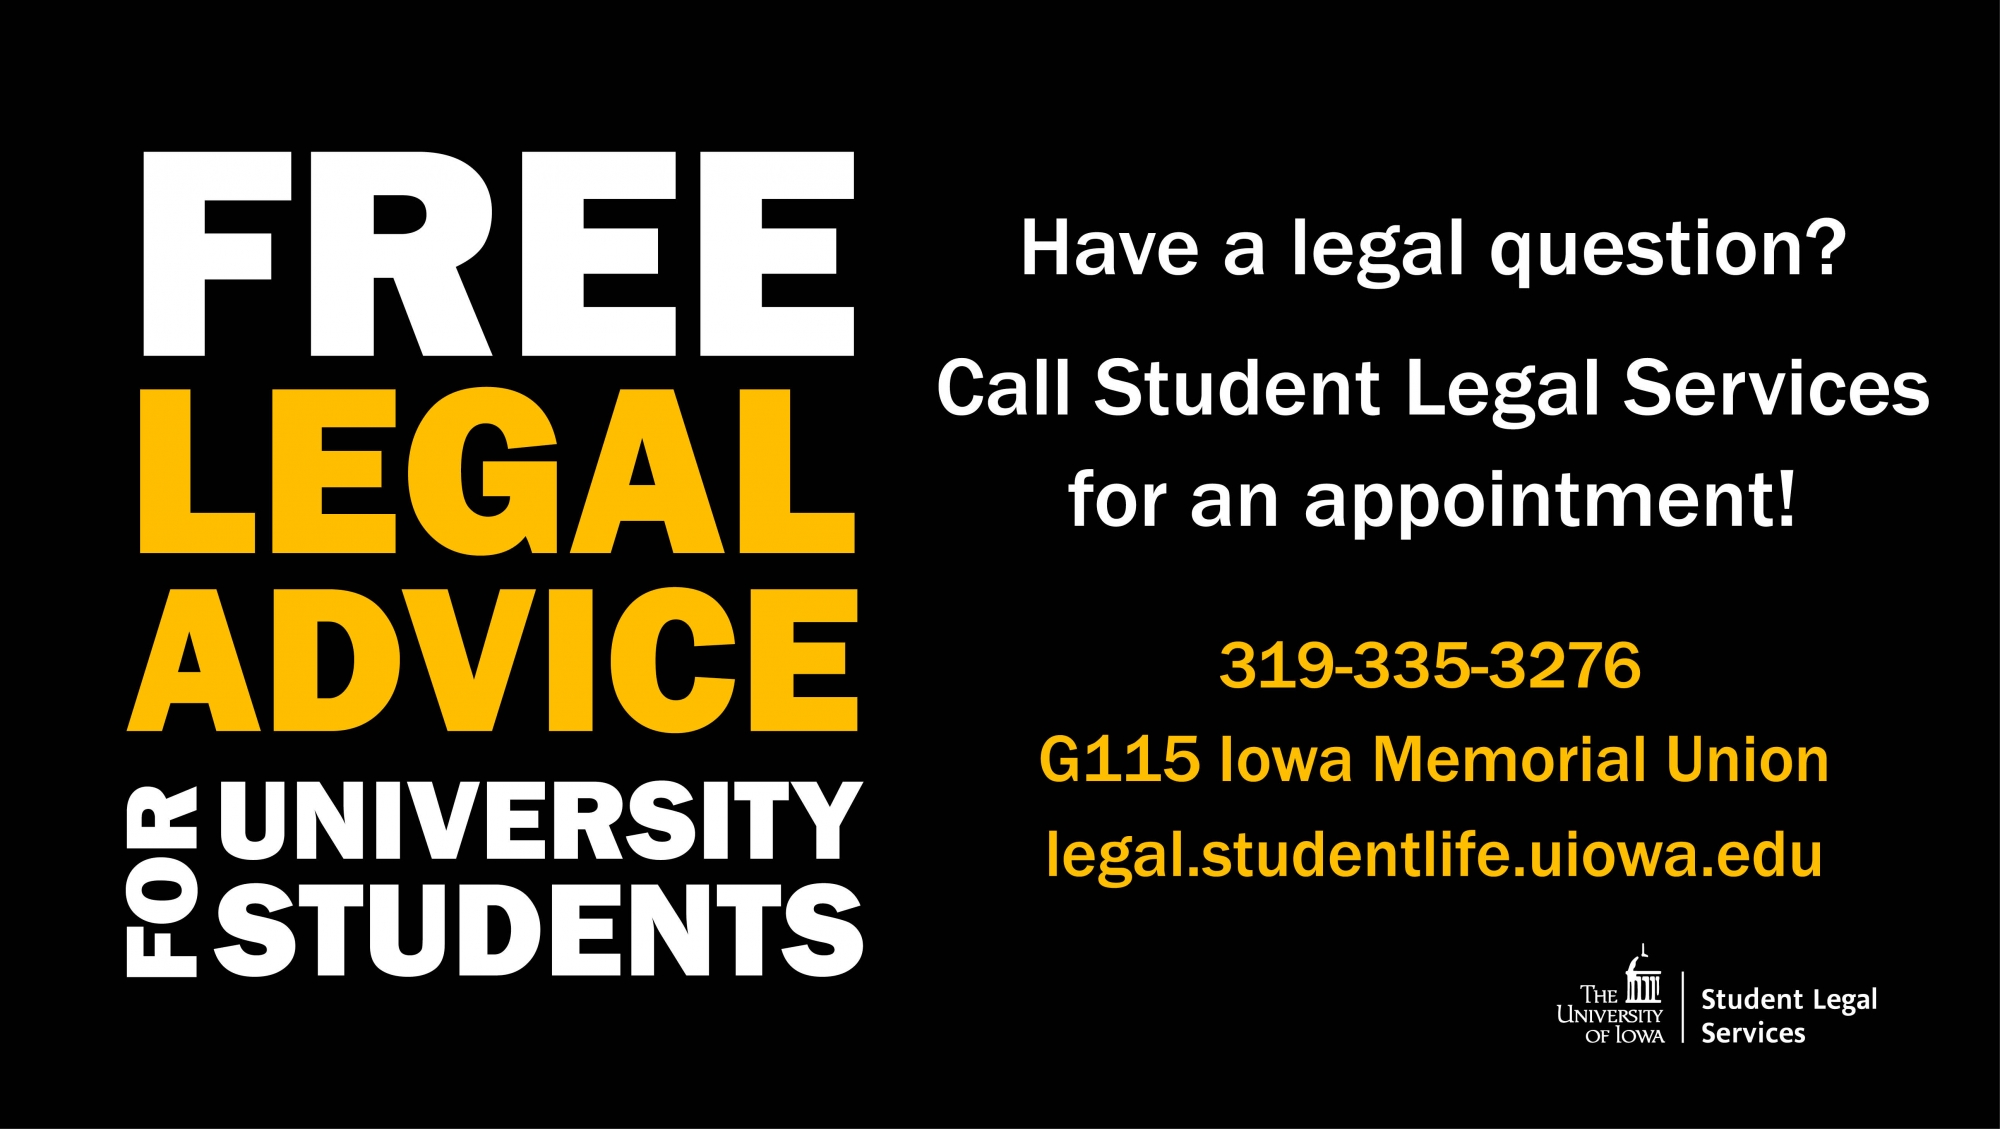 Student Legal Services